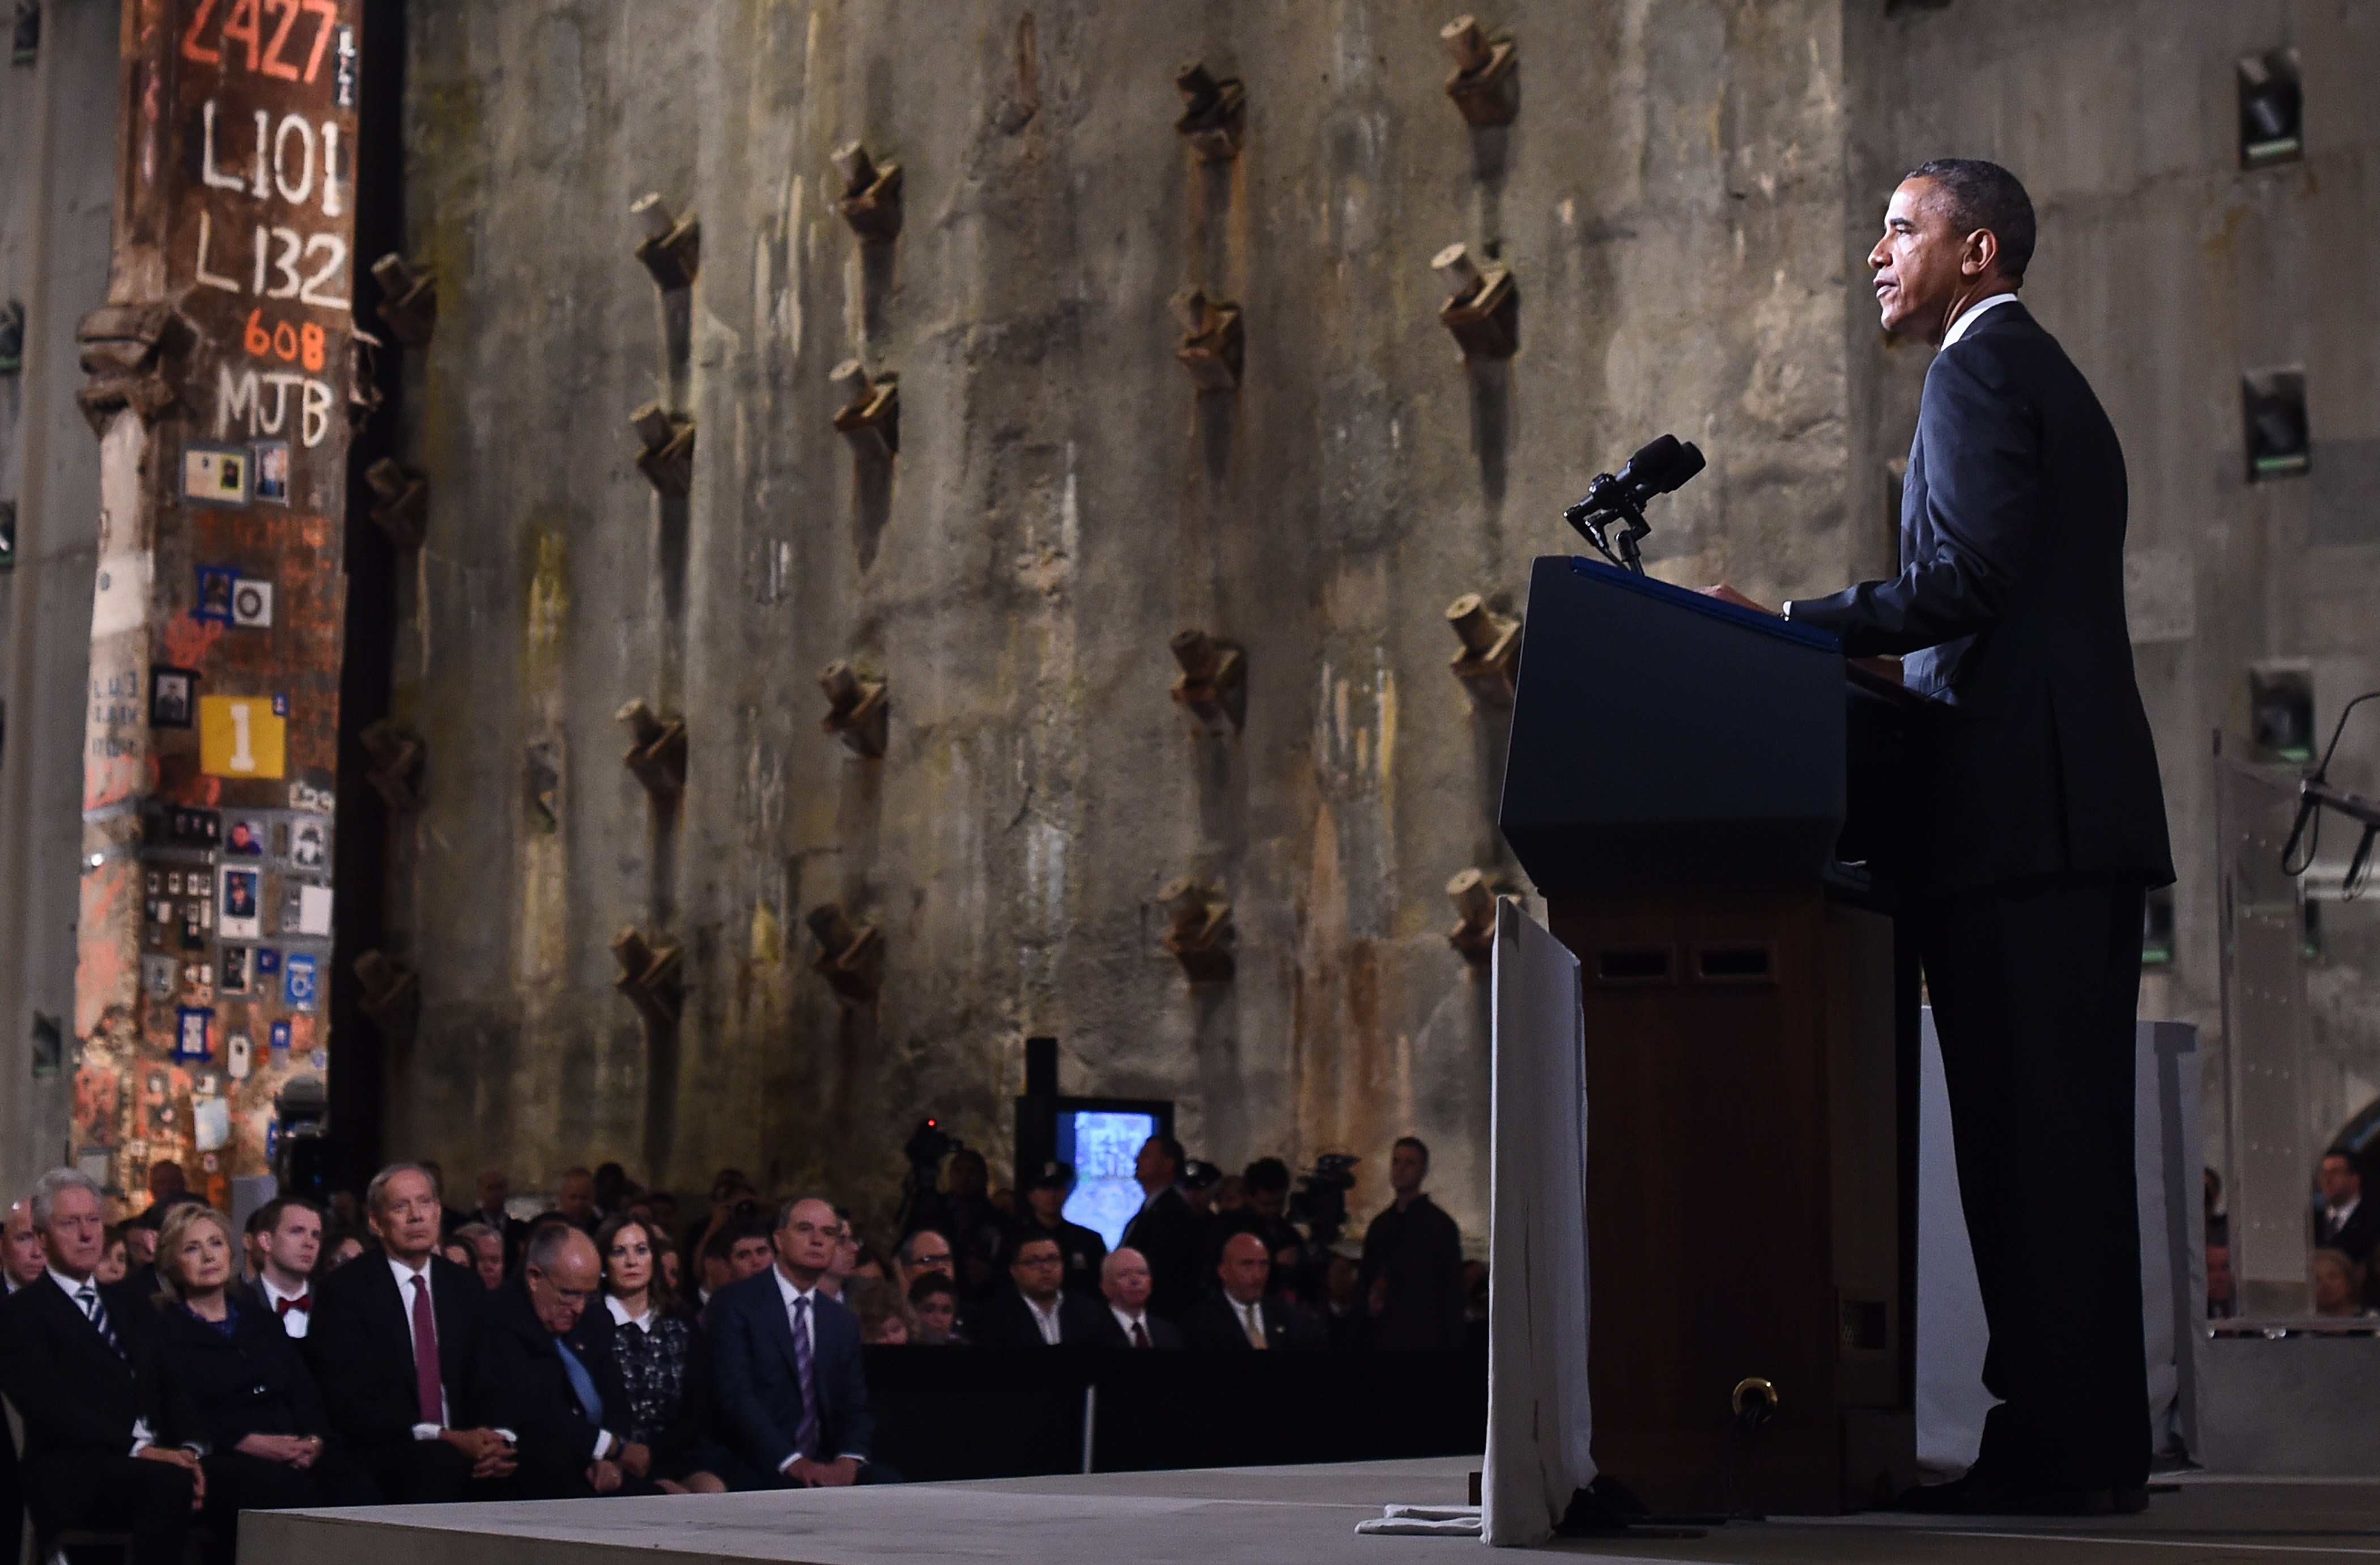 President Obama before the crowd (JEWEL SAMAD/AFP/Getty Images)